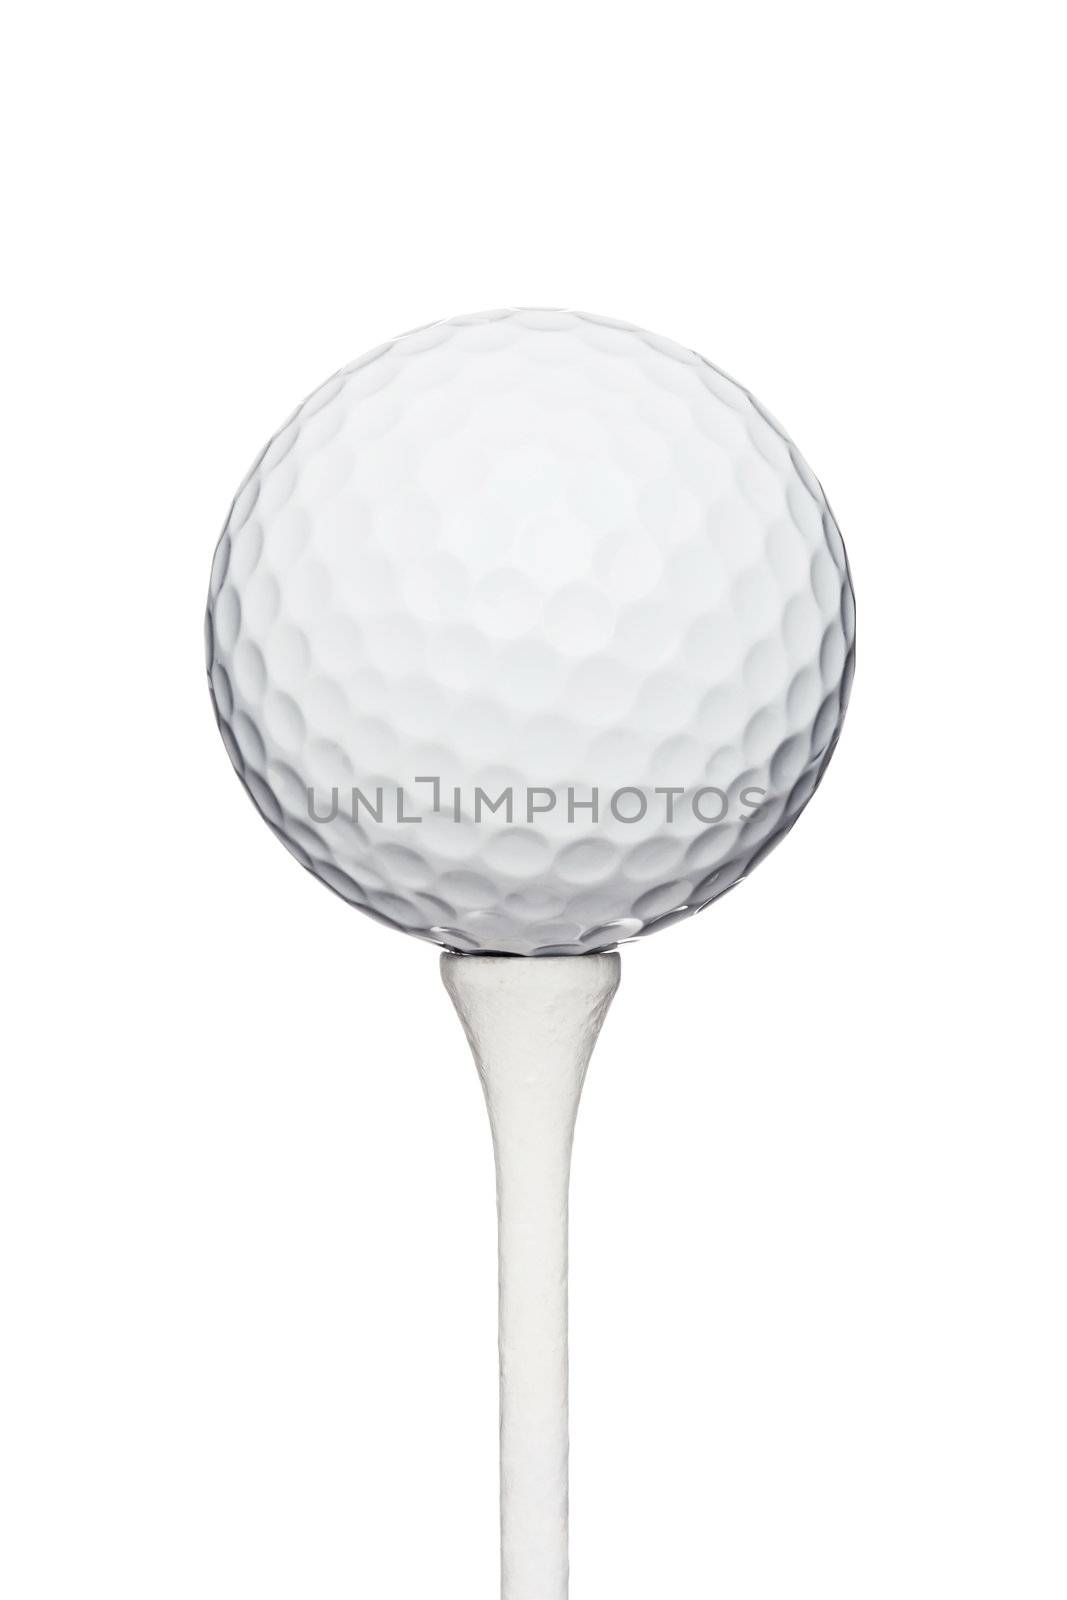 professional golf ball on a wooden tee, against white background